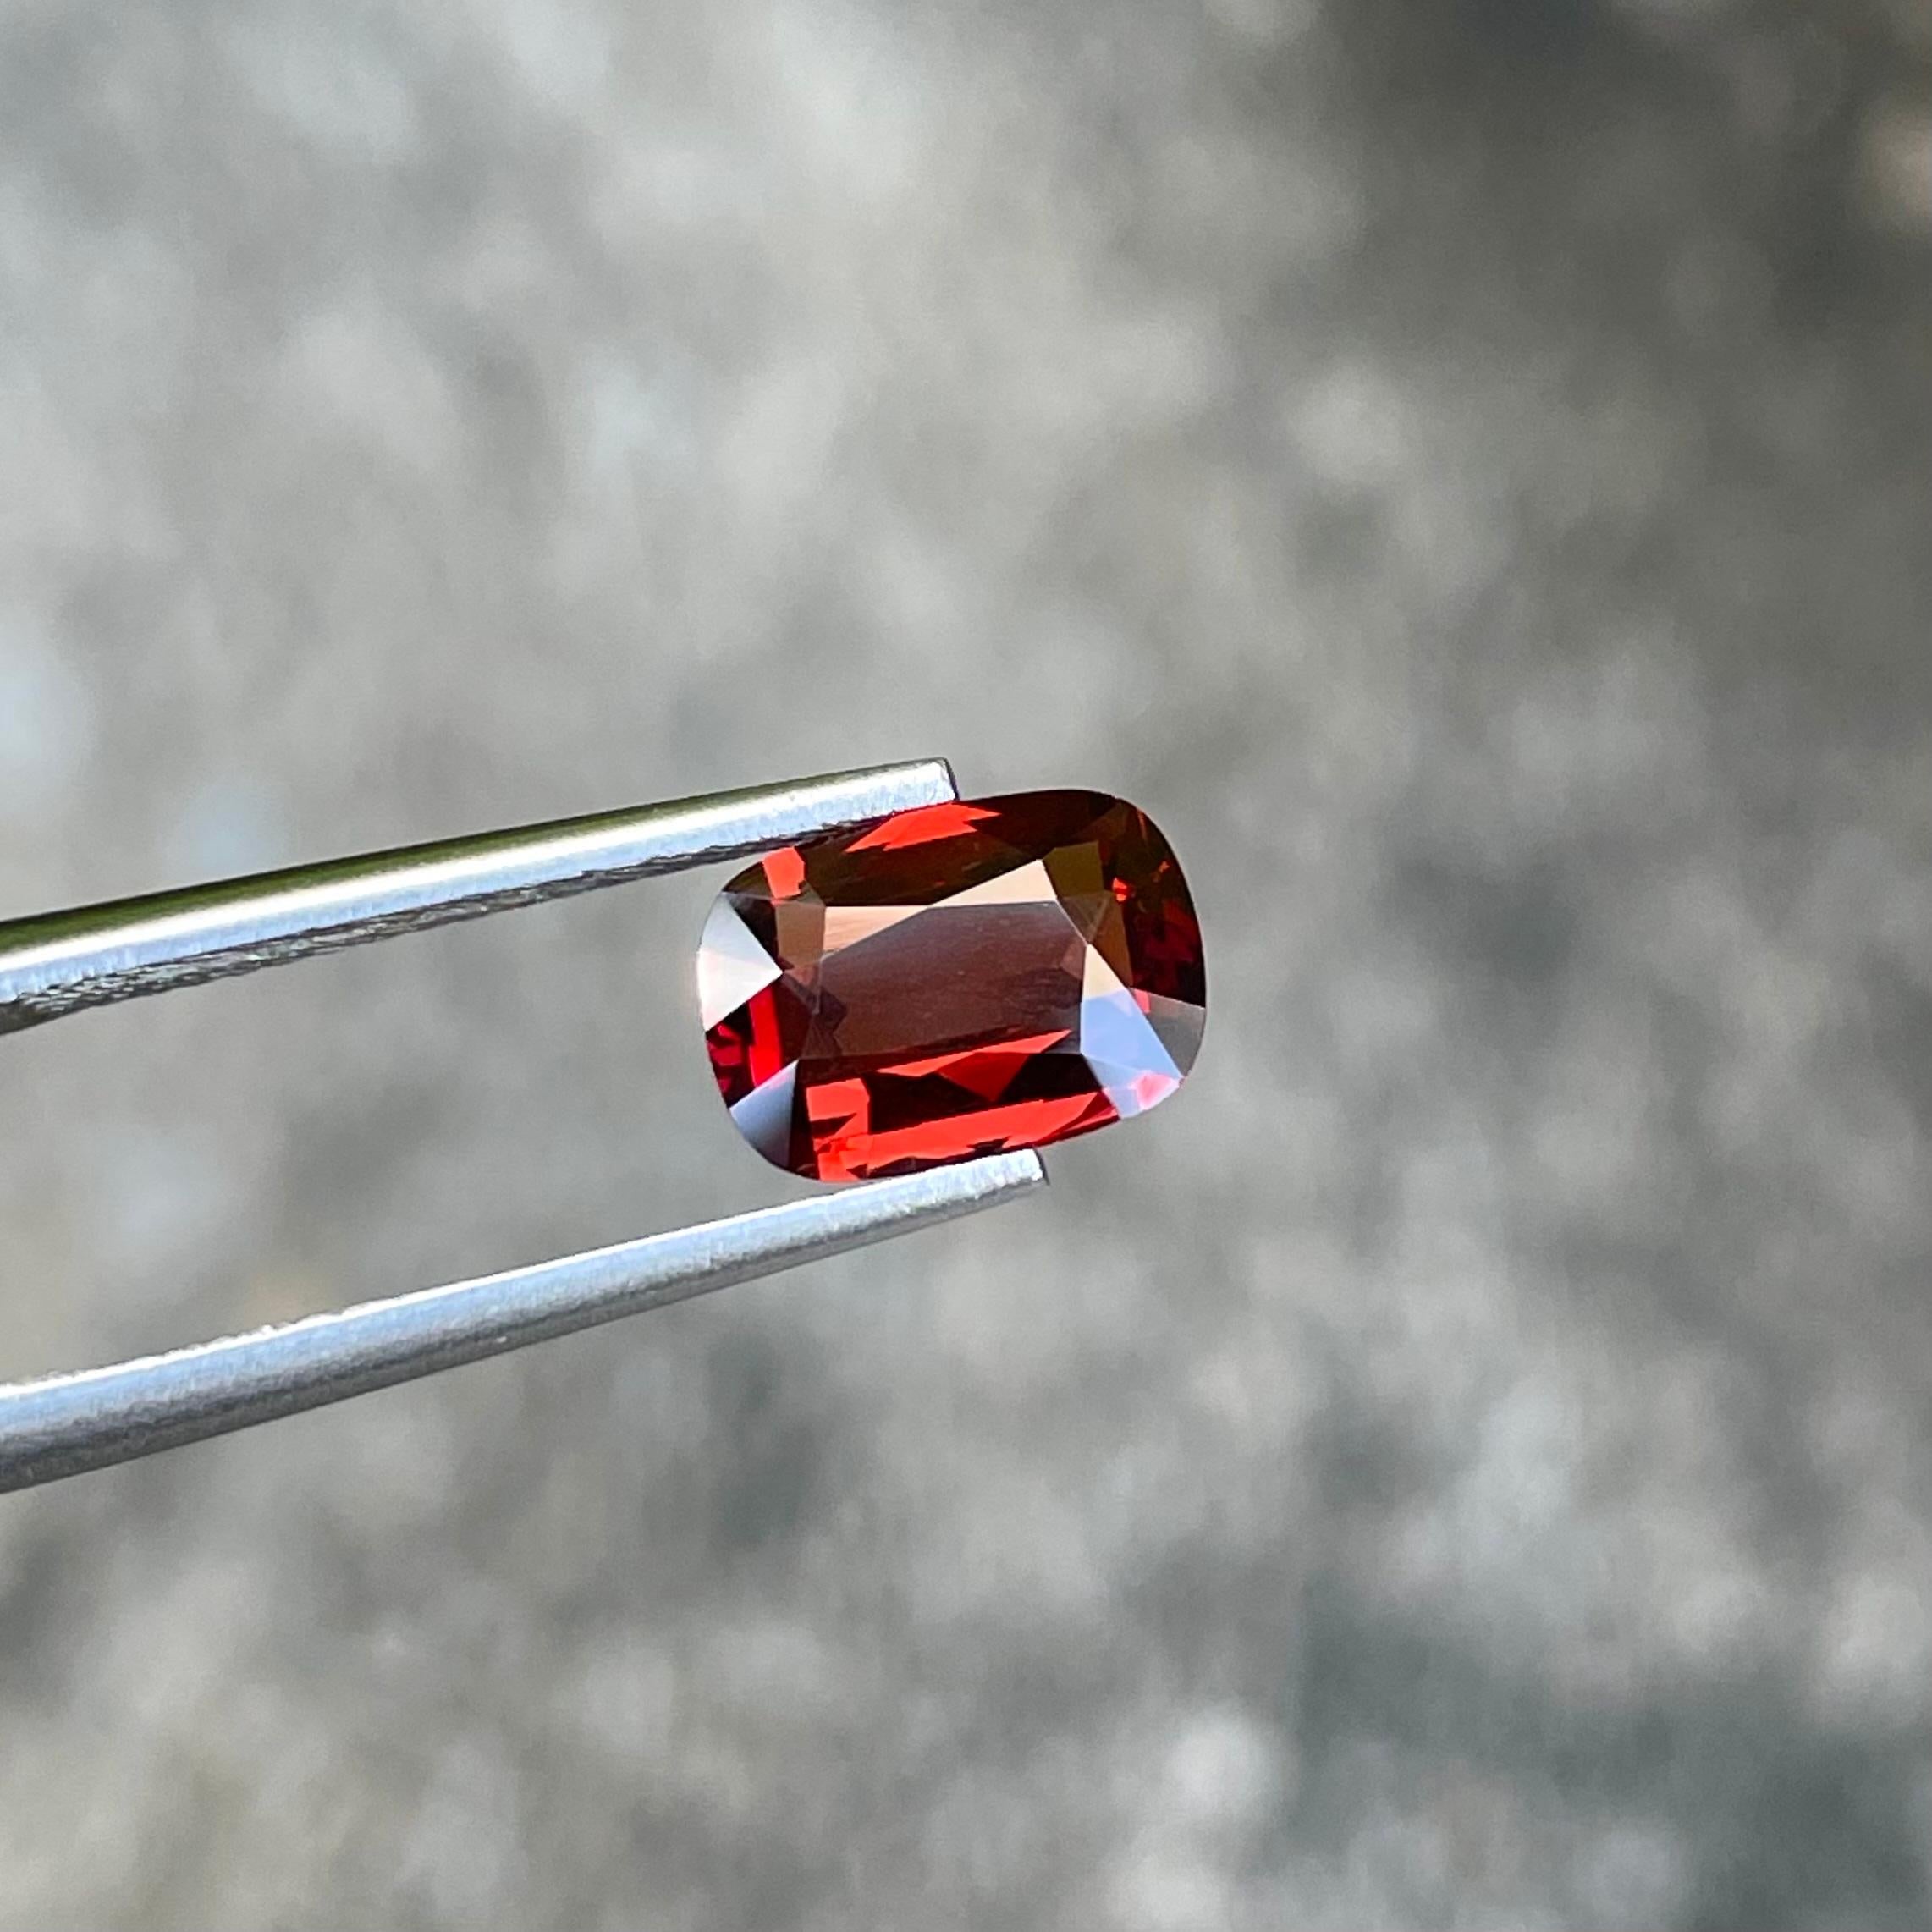 1.80 carats 
9.0x6.4x3.3 mm
Origin Burma
Cut Step Cushion
Treatment None
Shape Cushion
Clarity Eye Clean




Deep Red Burmese Loose Spinel, a true marvel of nature and a testament to timeless beauty. This stunning gemstone, boasting a substantial